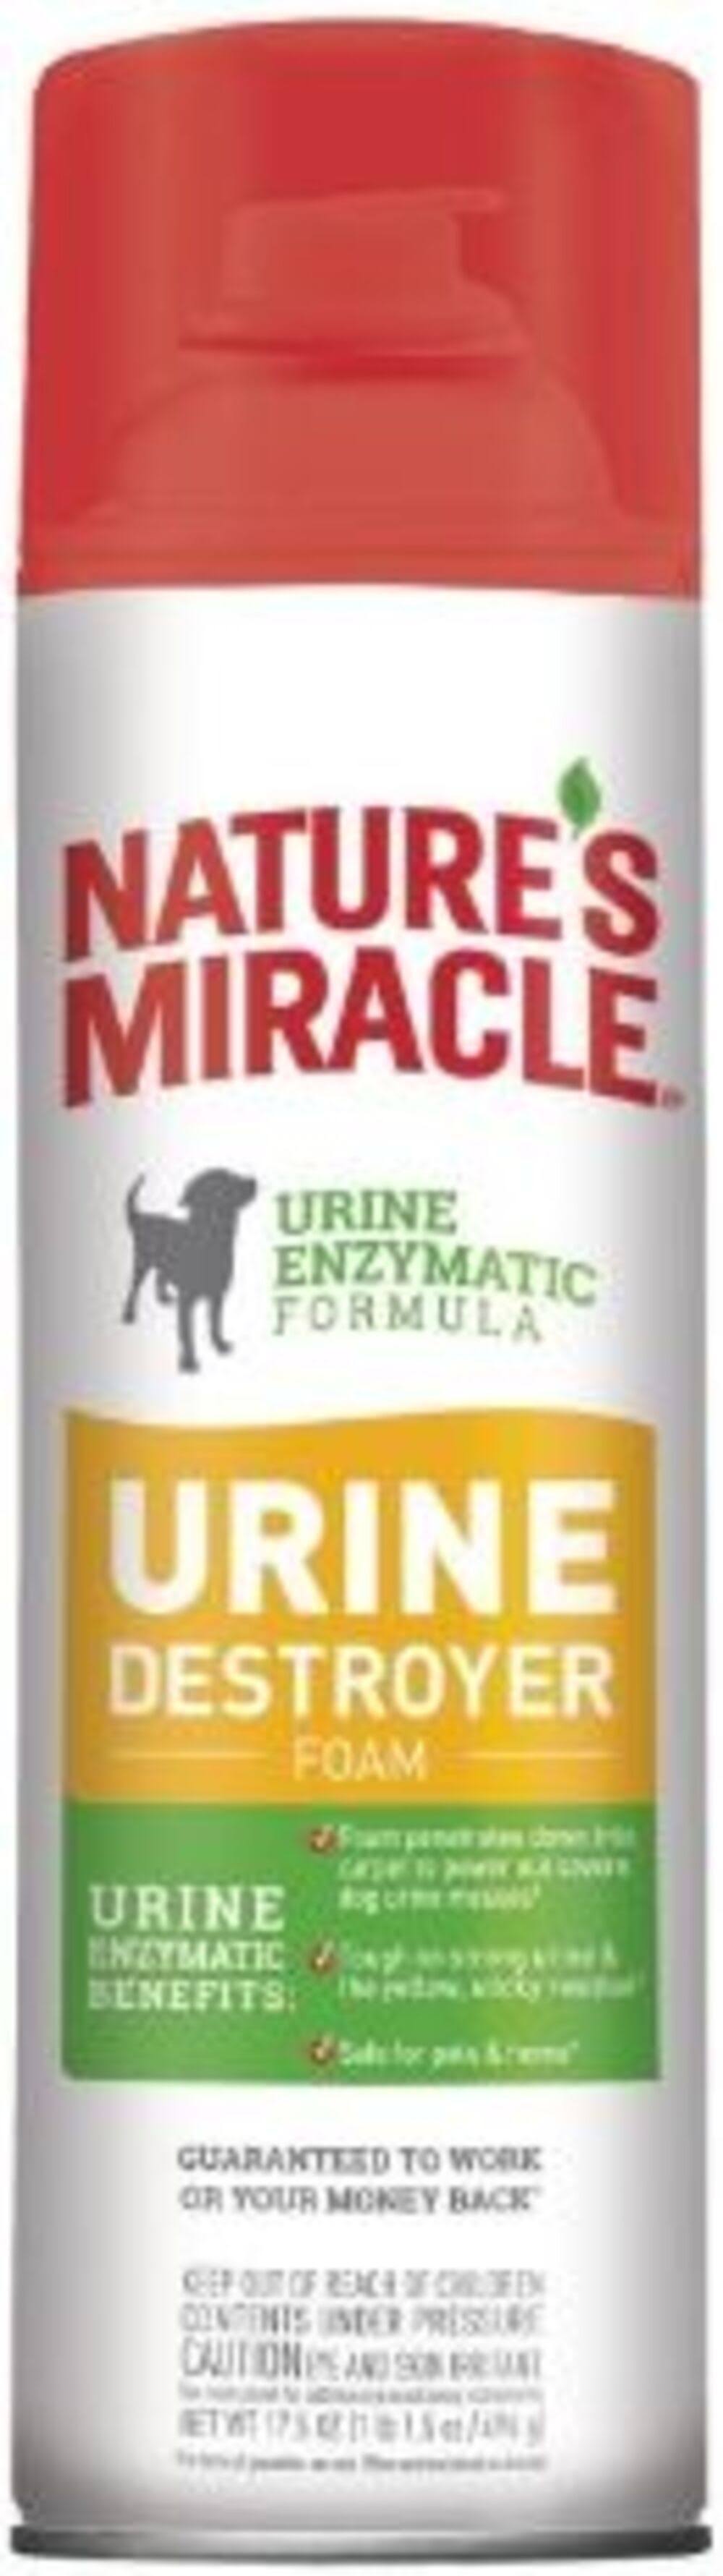 Nature's Miracle Nm Dog Urine Destroyer Foam - 6oz